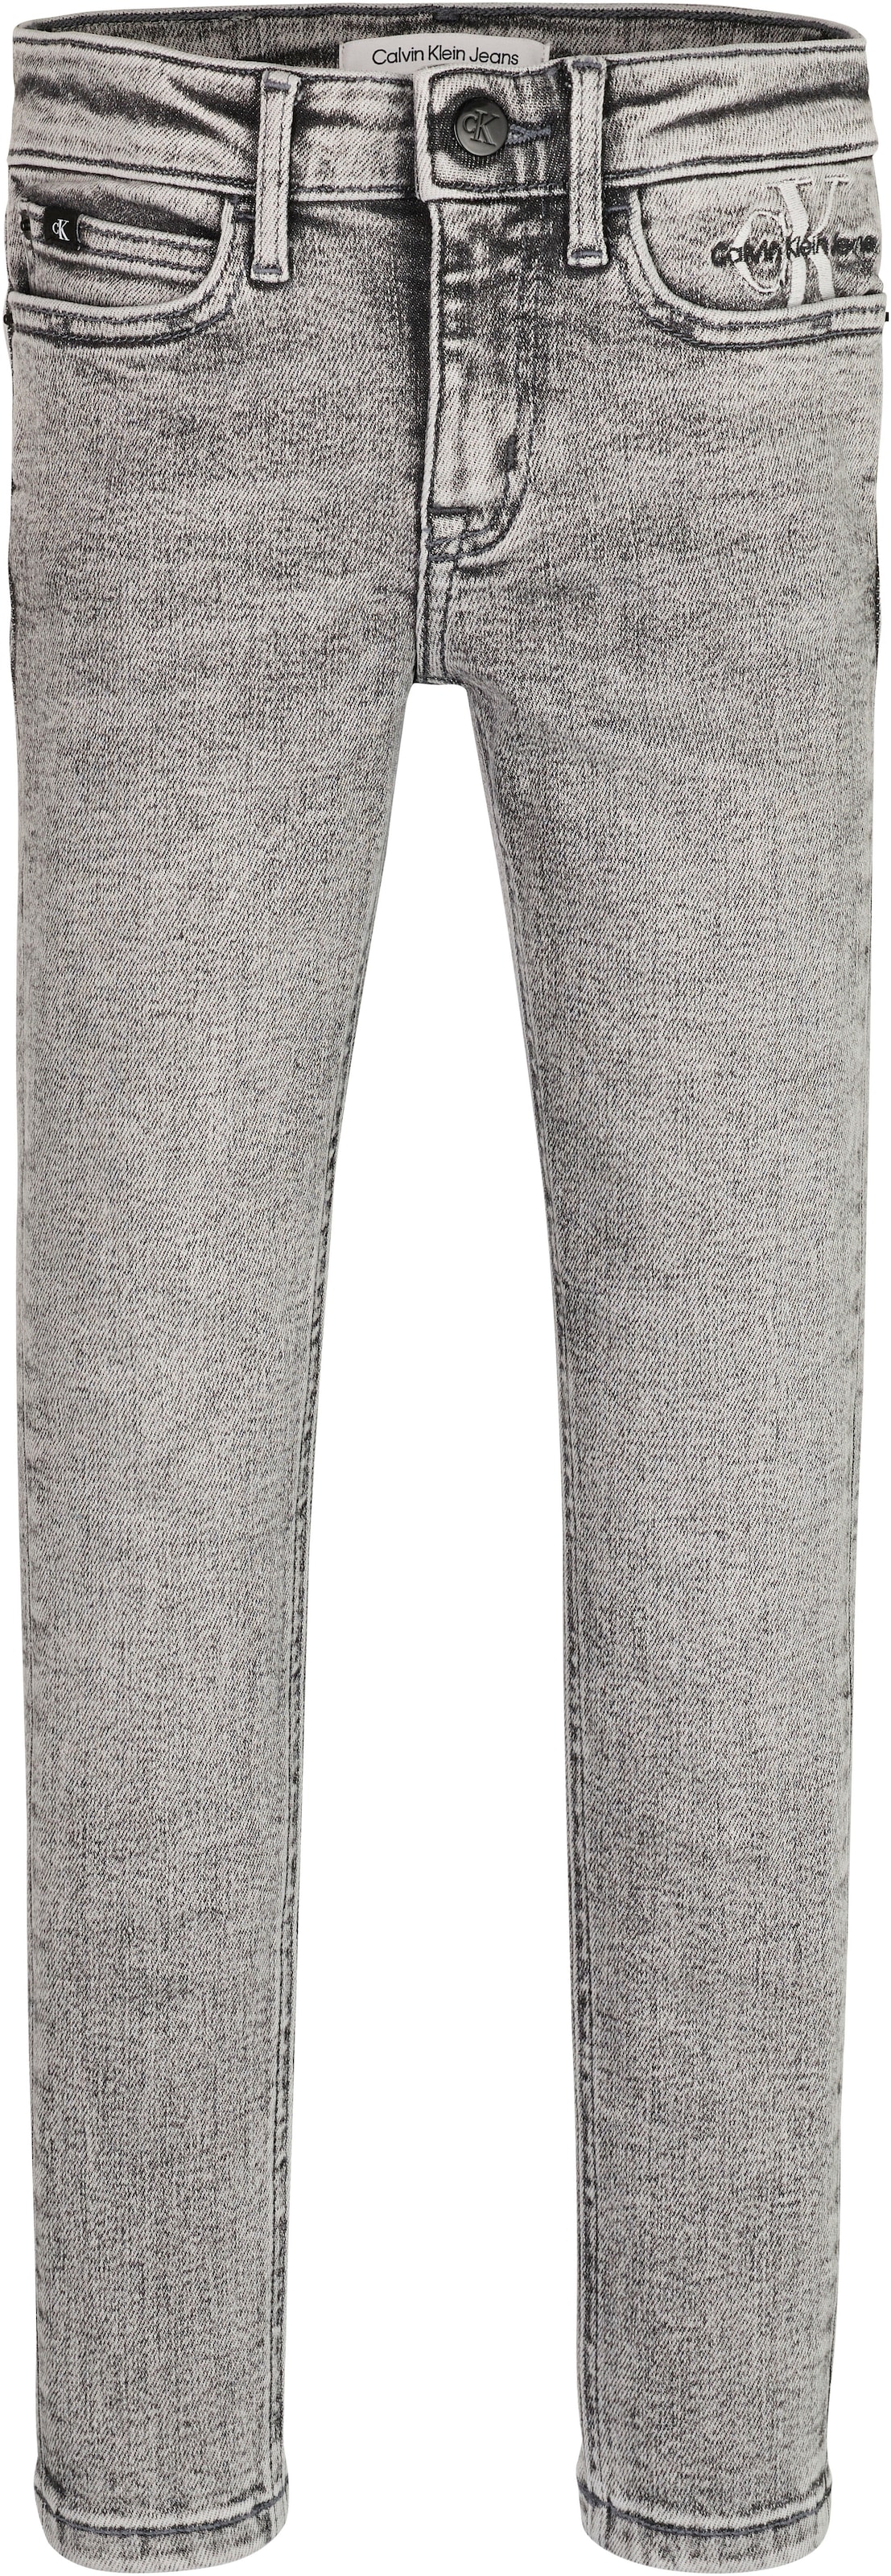 Jeans Stretch-Jeans GREY« MR ♕ »SKINNY bei Calvin WASHED Klein